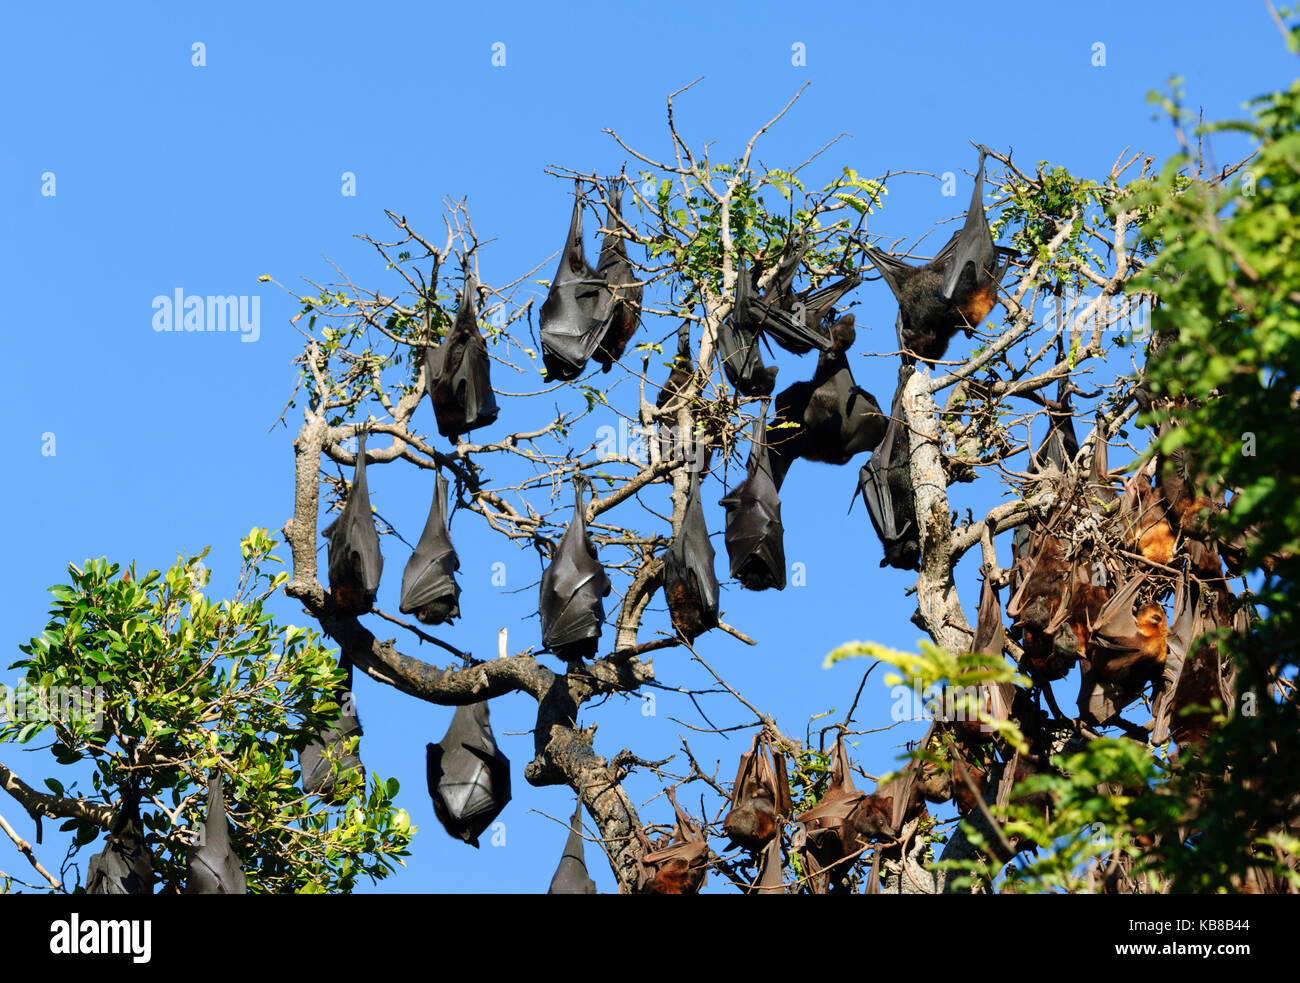 A mixed colony of Black Flying Foxes (Pteropus alecto) and Little Red Flying Foxes (Pteropus scapulatus) roosting in Lissner Park in Charters Towers, Stock Photo